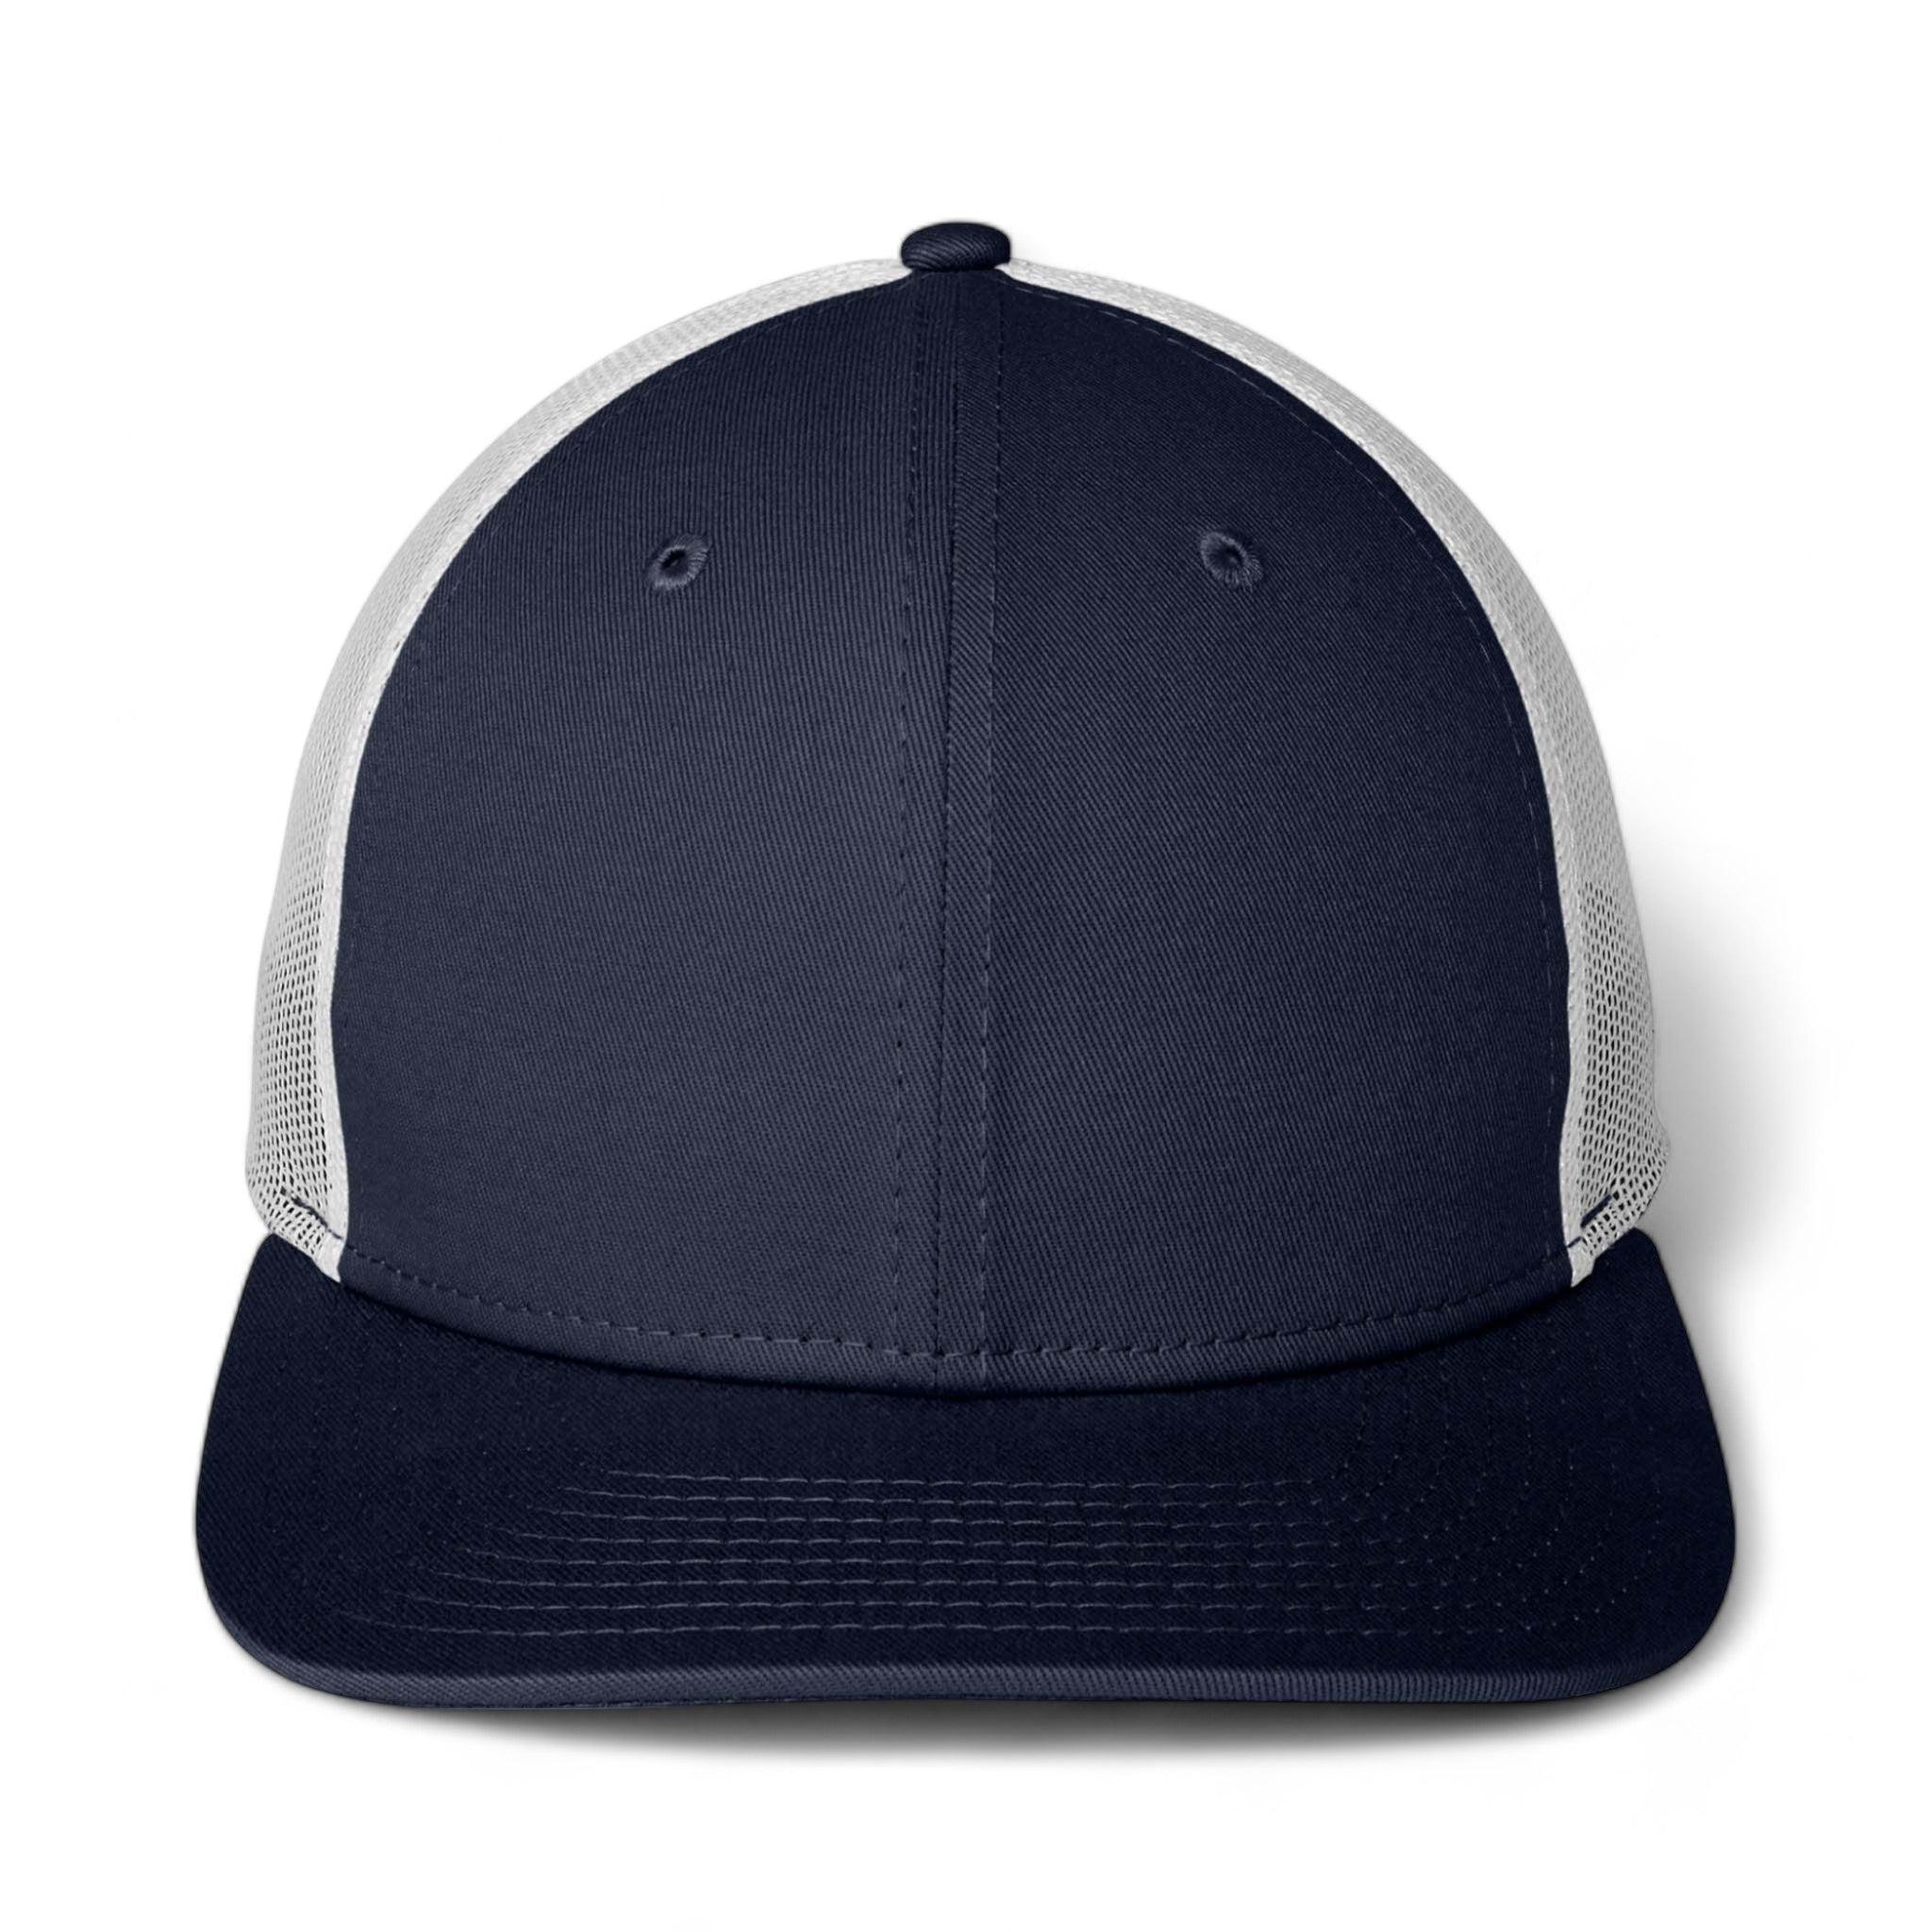 Front view of New Era NE207 custom hat in deep navy and white